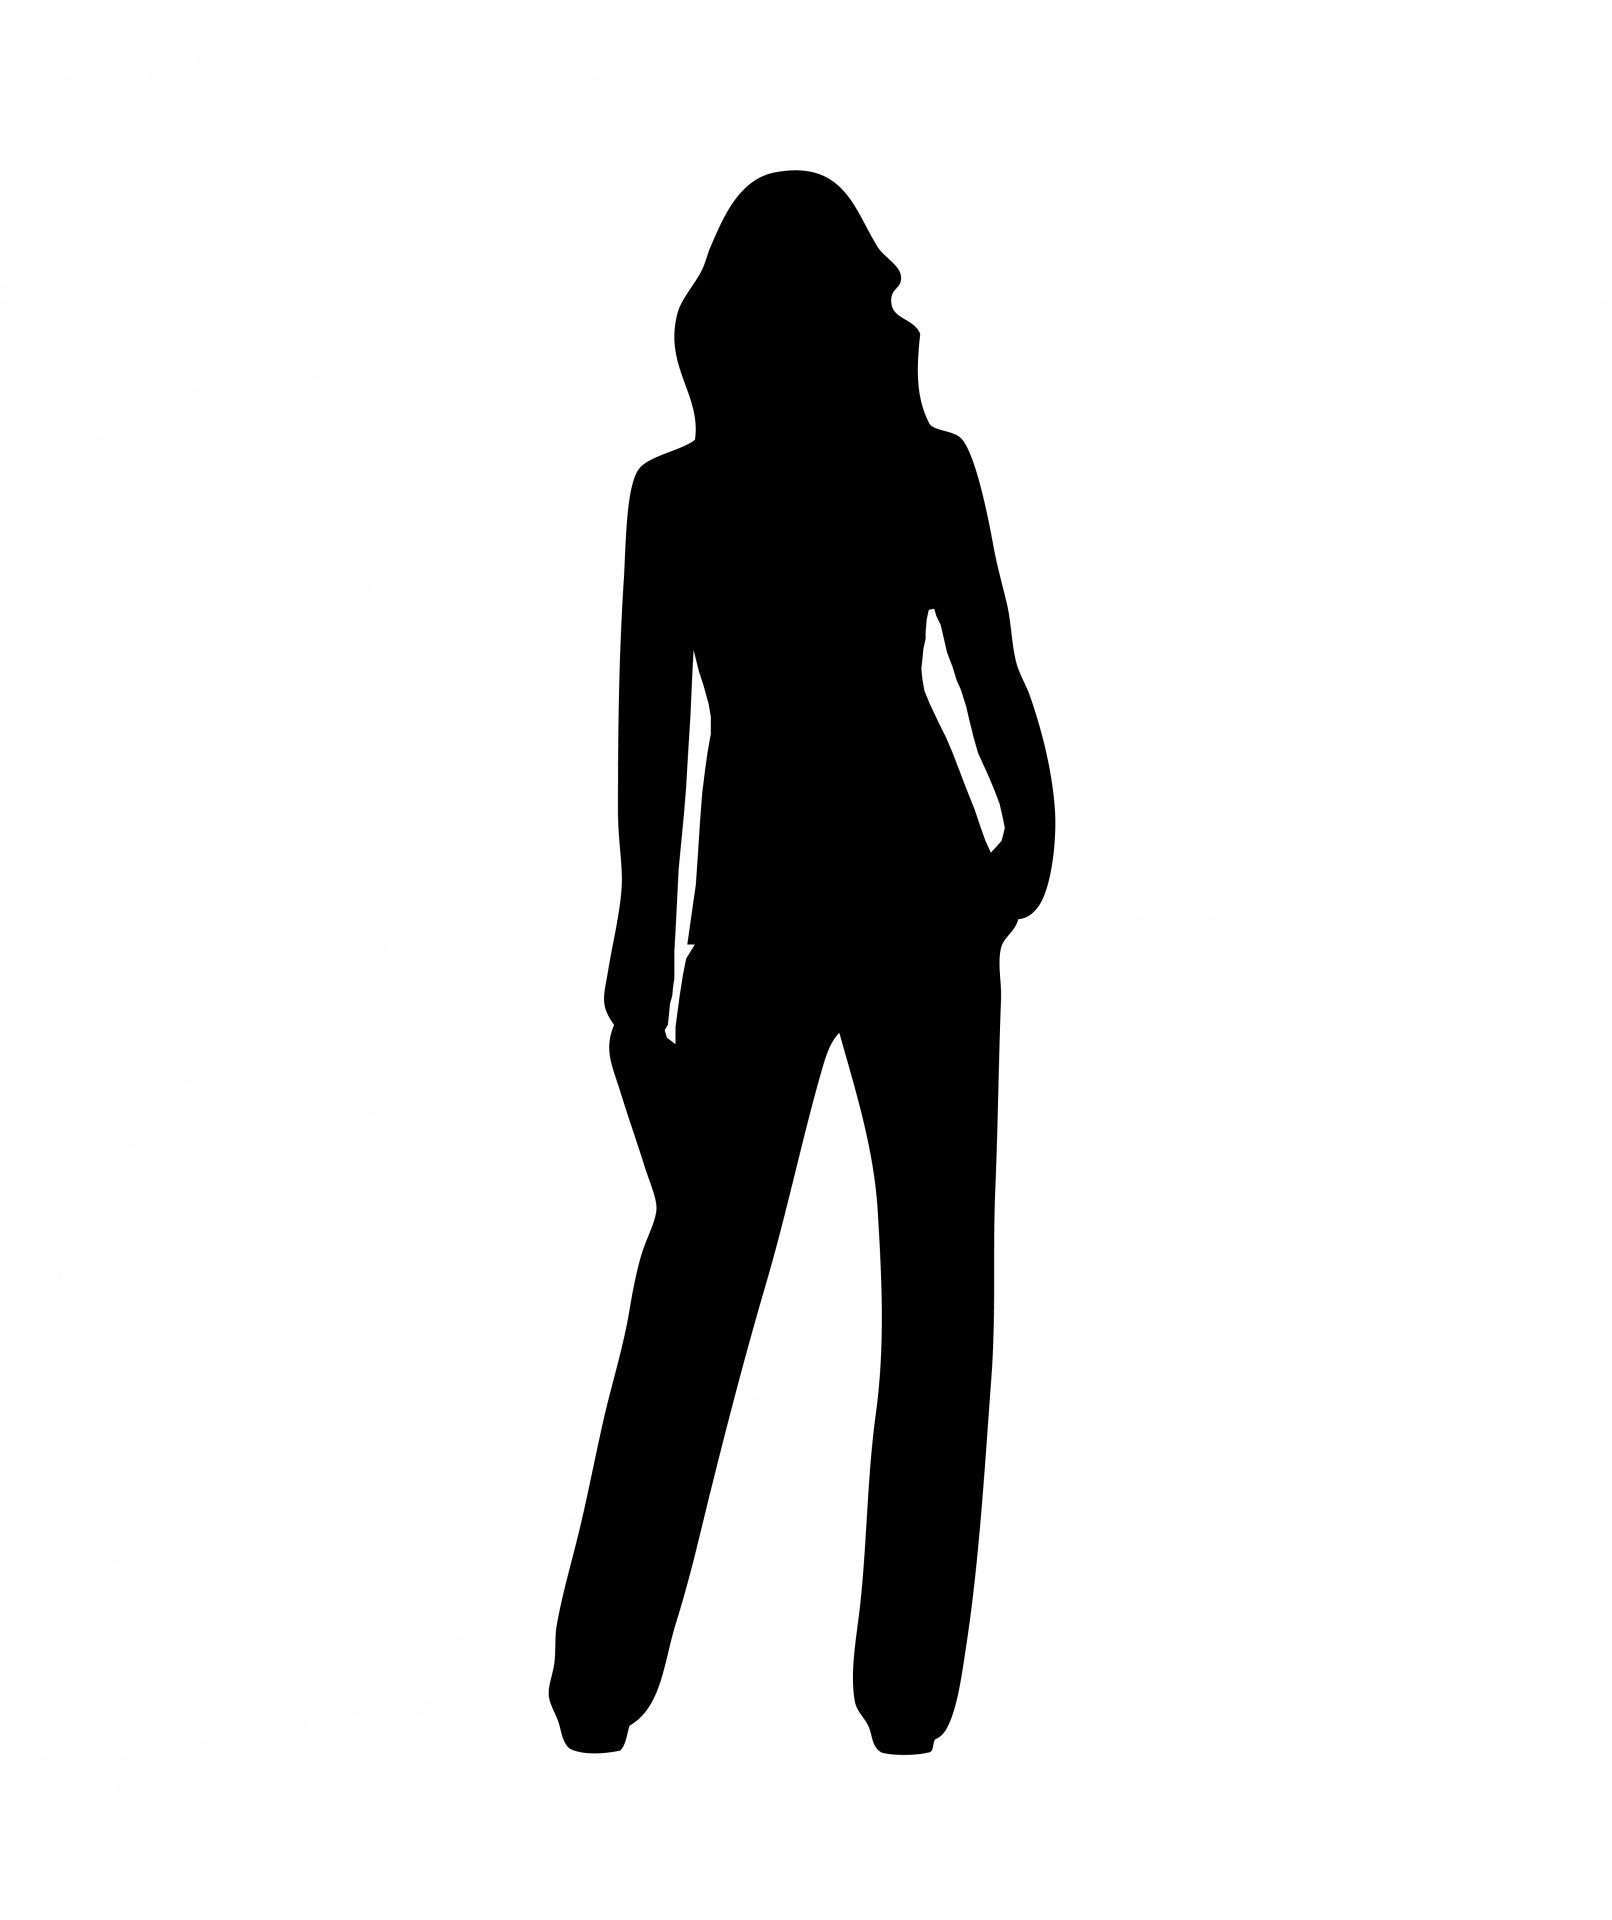 Black silhouette of a woman wearing trousers illustration